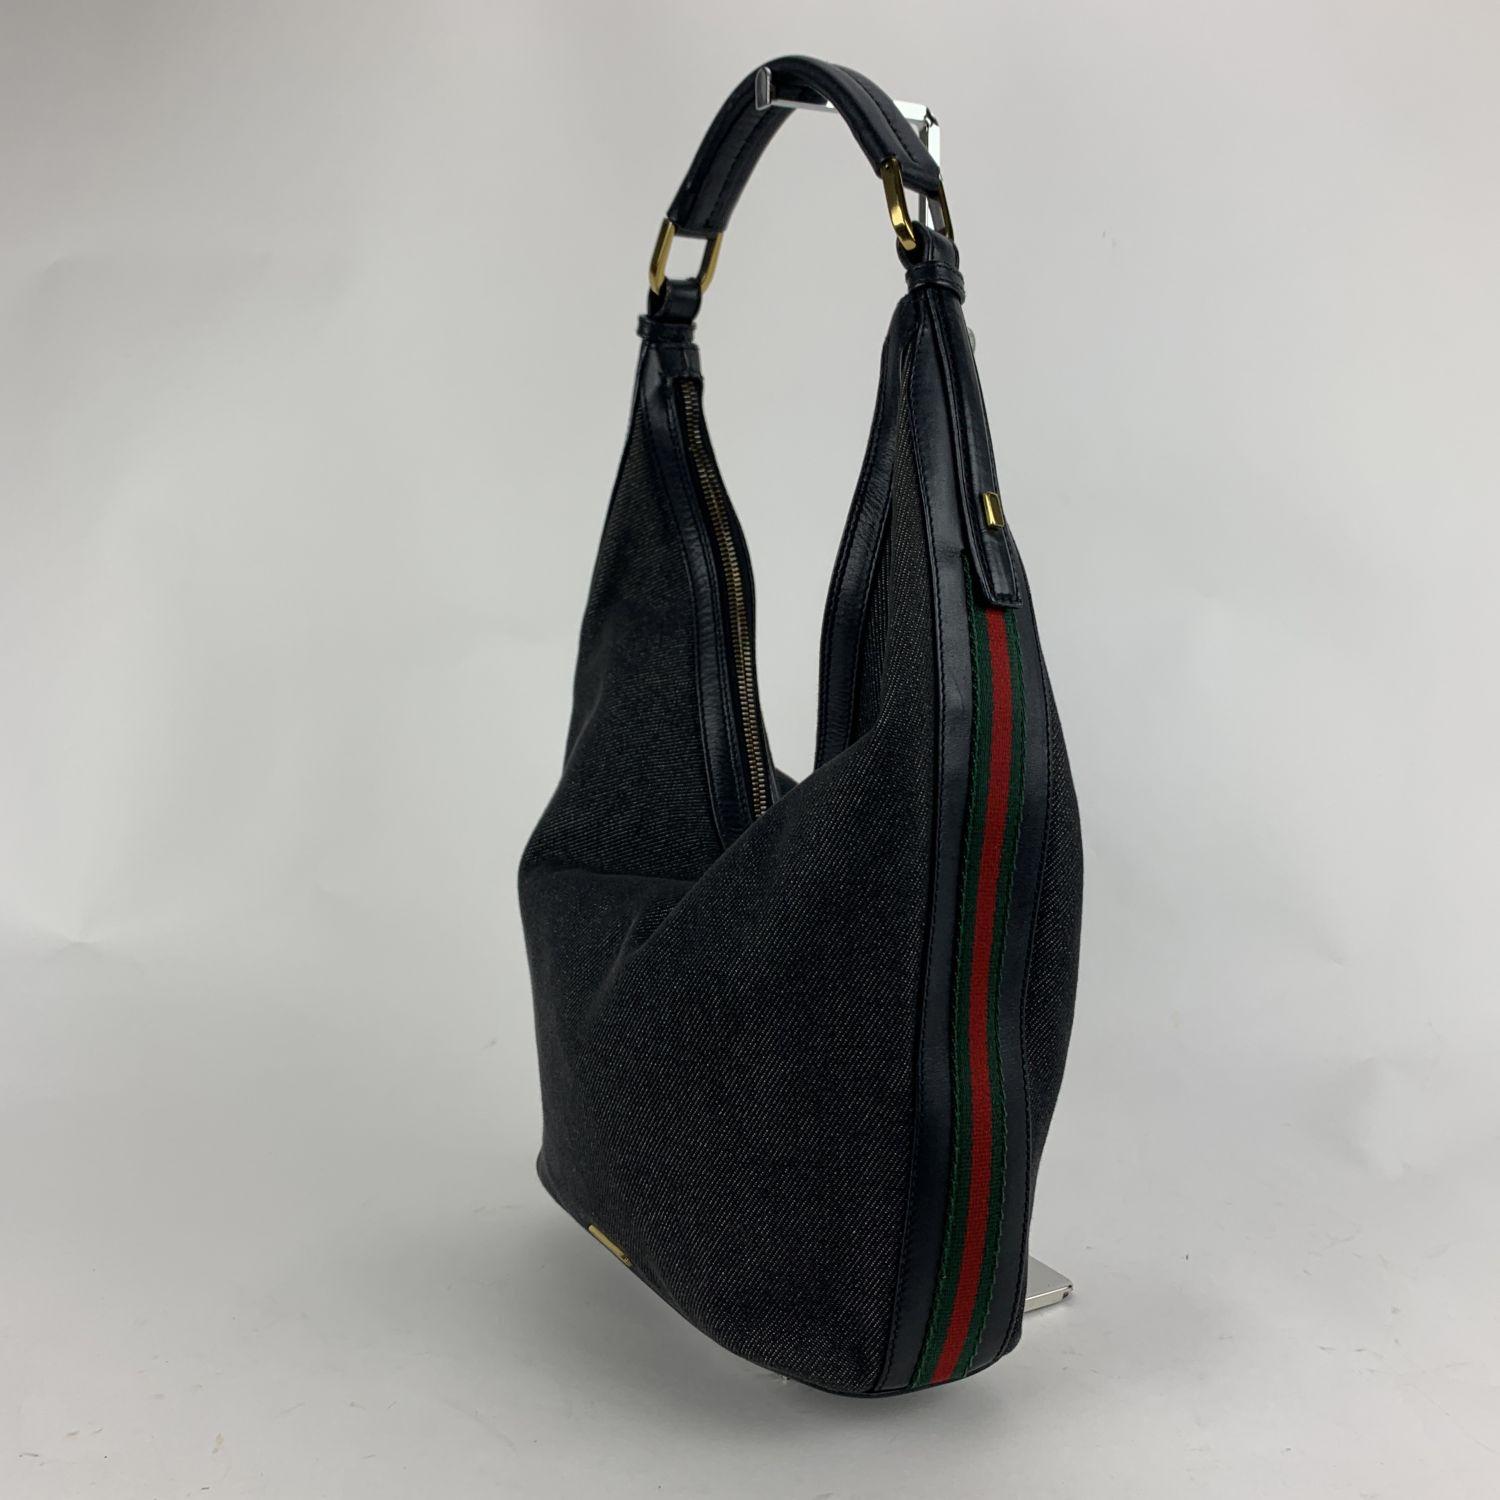 Women's Gucci Black Canvas Hobo Shoulder Bag Tote with Stripes